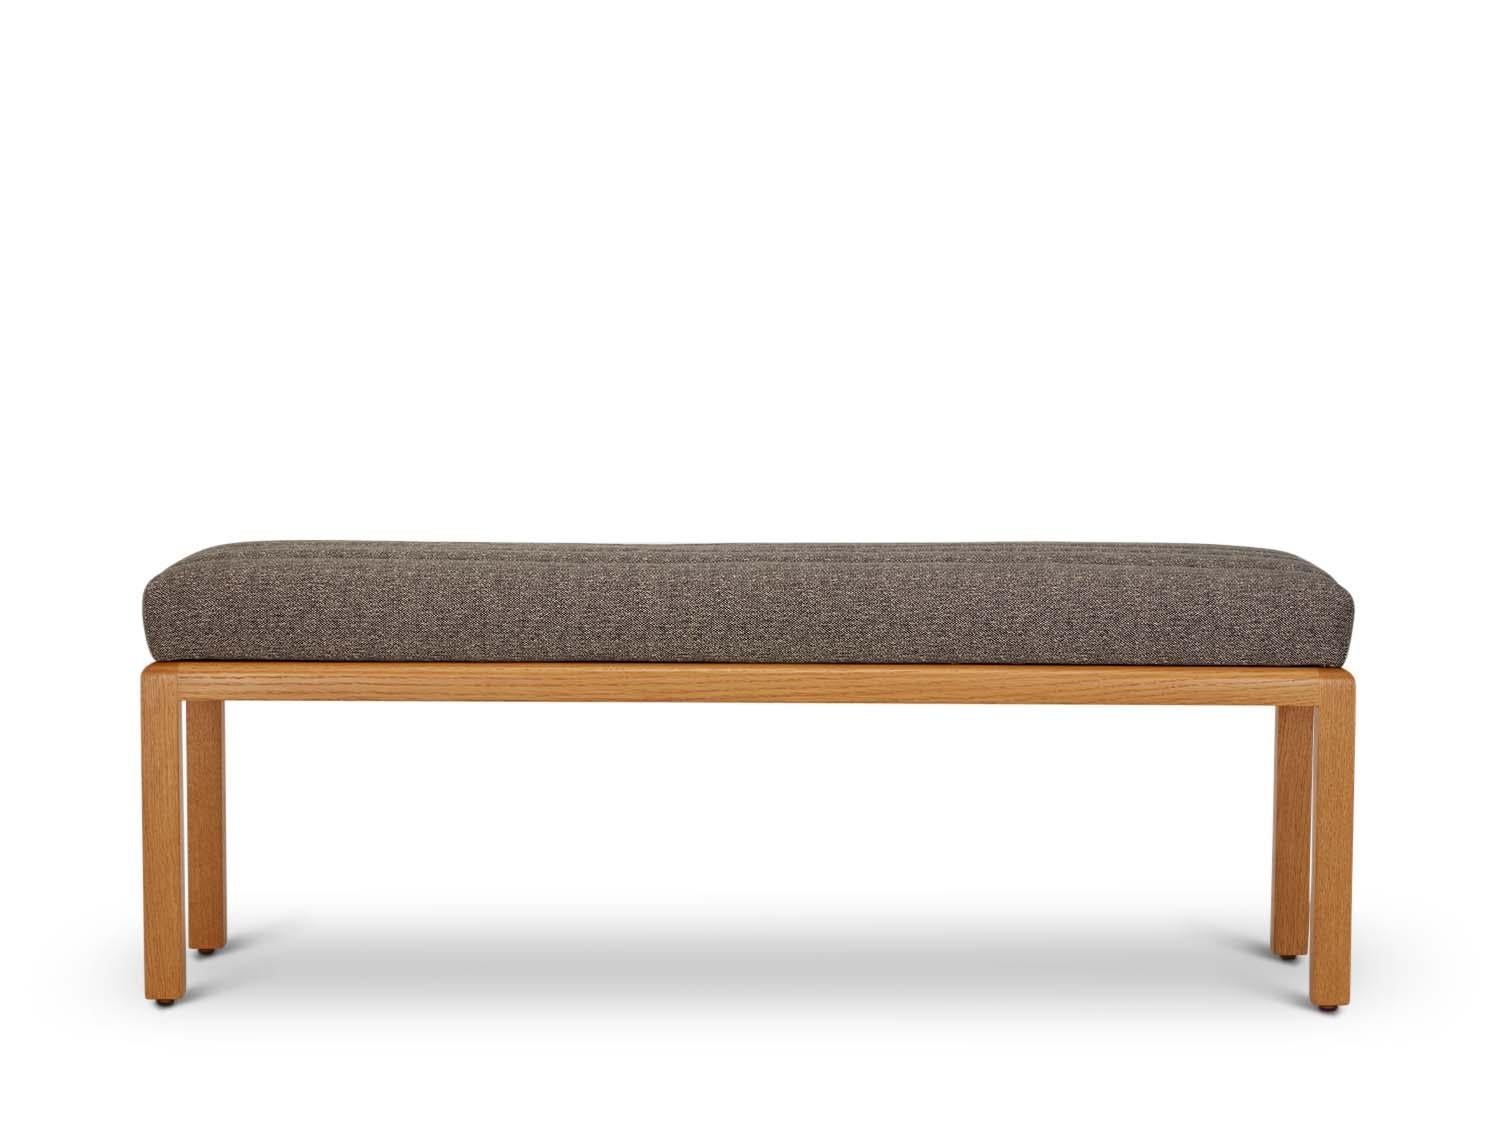 The Shoreland Bench is part of the collaborative collection with interior designer Brian Paquette. The bench features a channel-tufted seat and a solid wood base.

The Lawson-Fenning Collection is designed and handmade in Los Angeles, California.